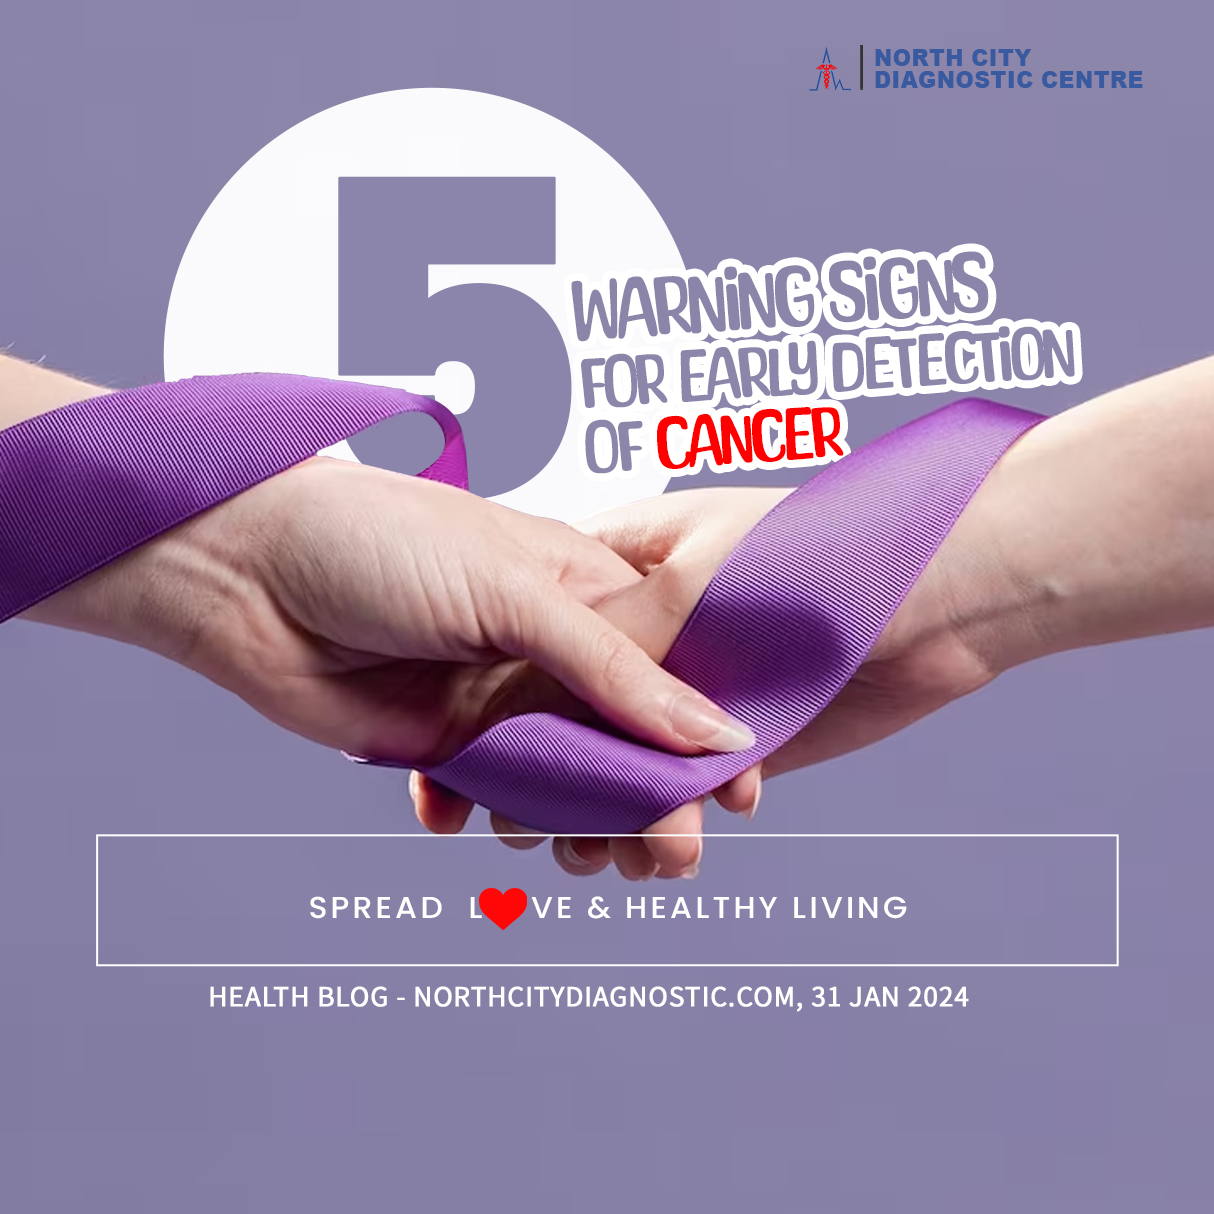 5 Warning Signs for Early Detection of Cancer